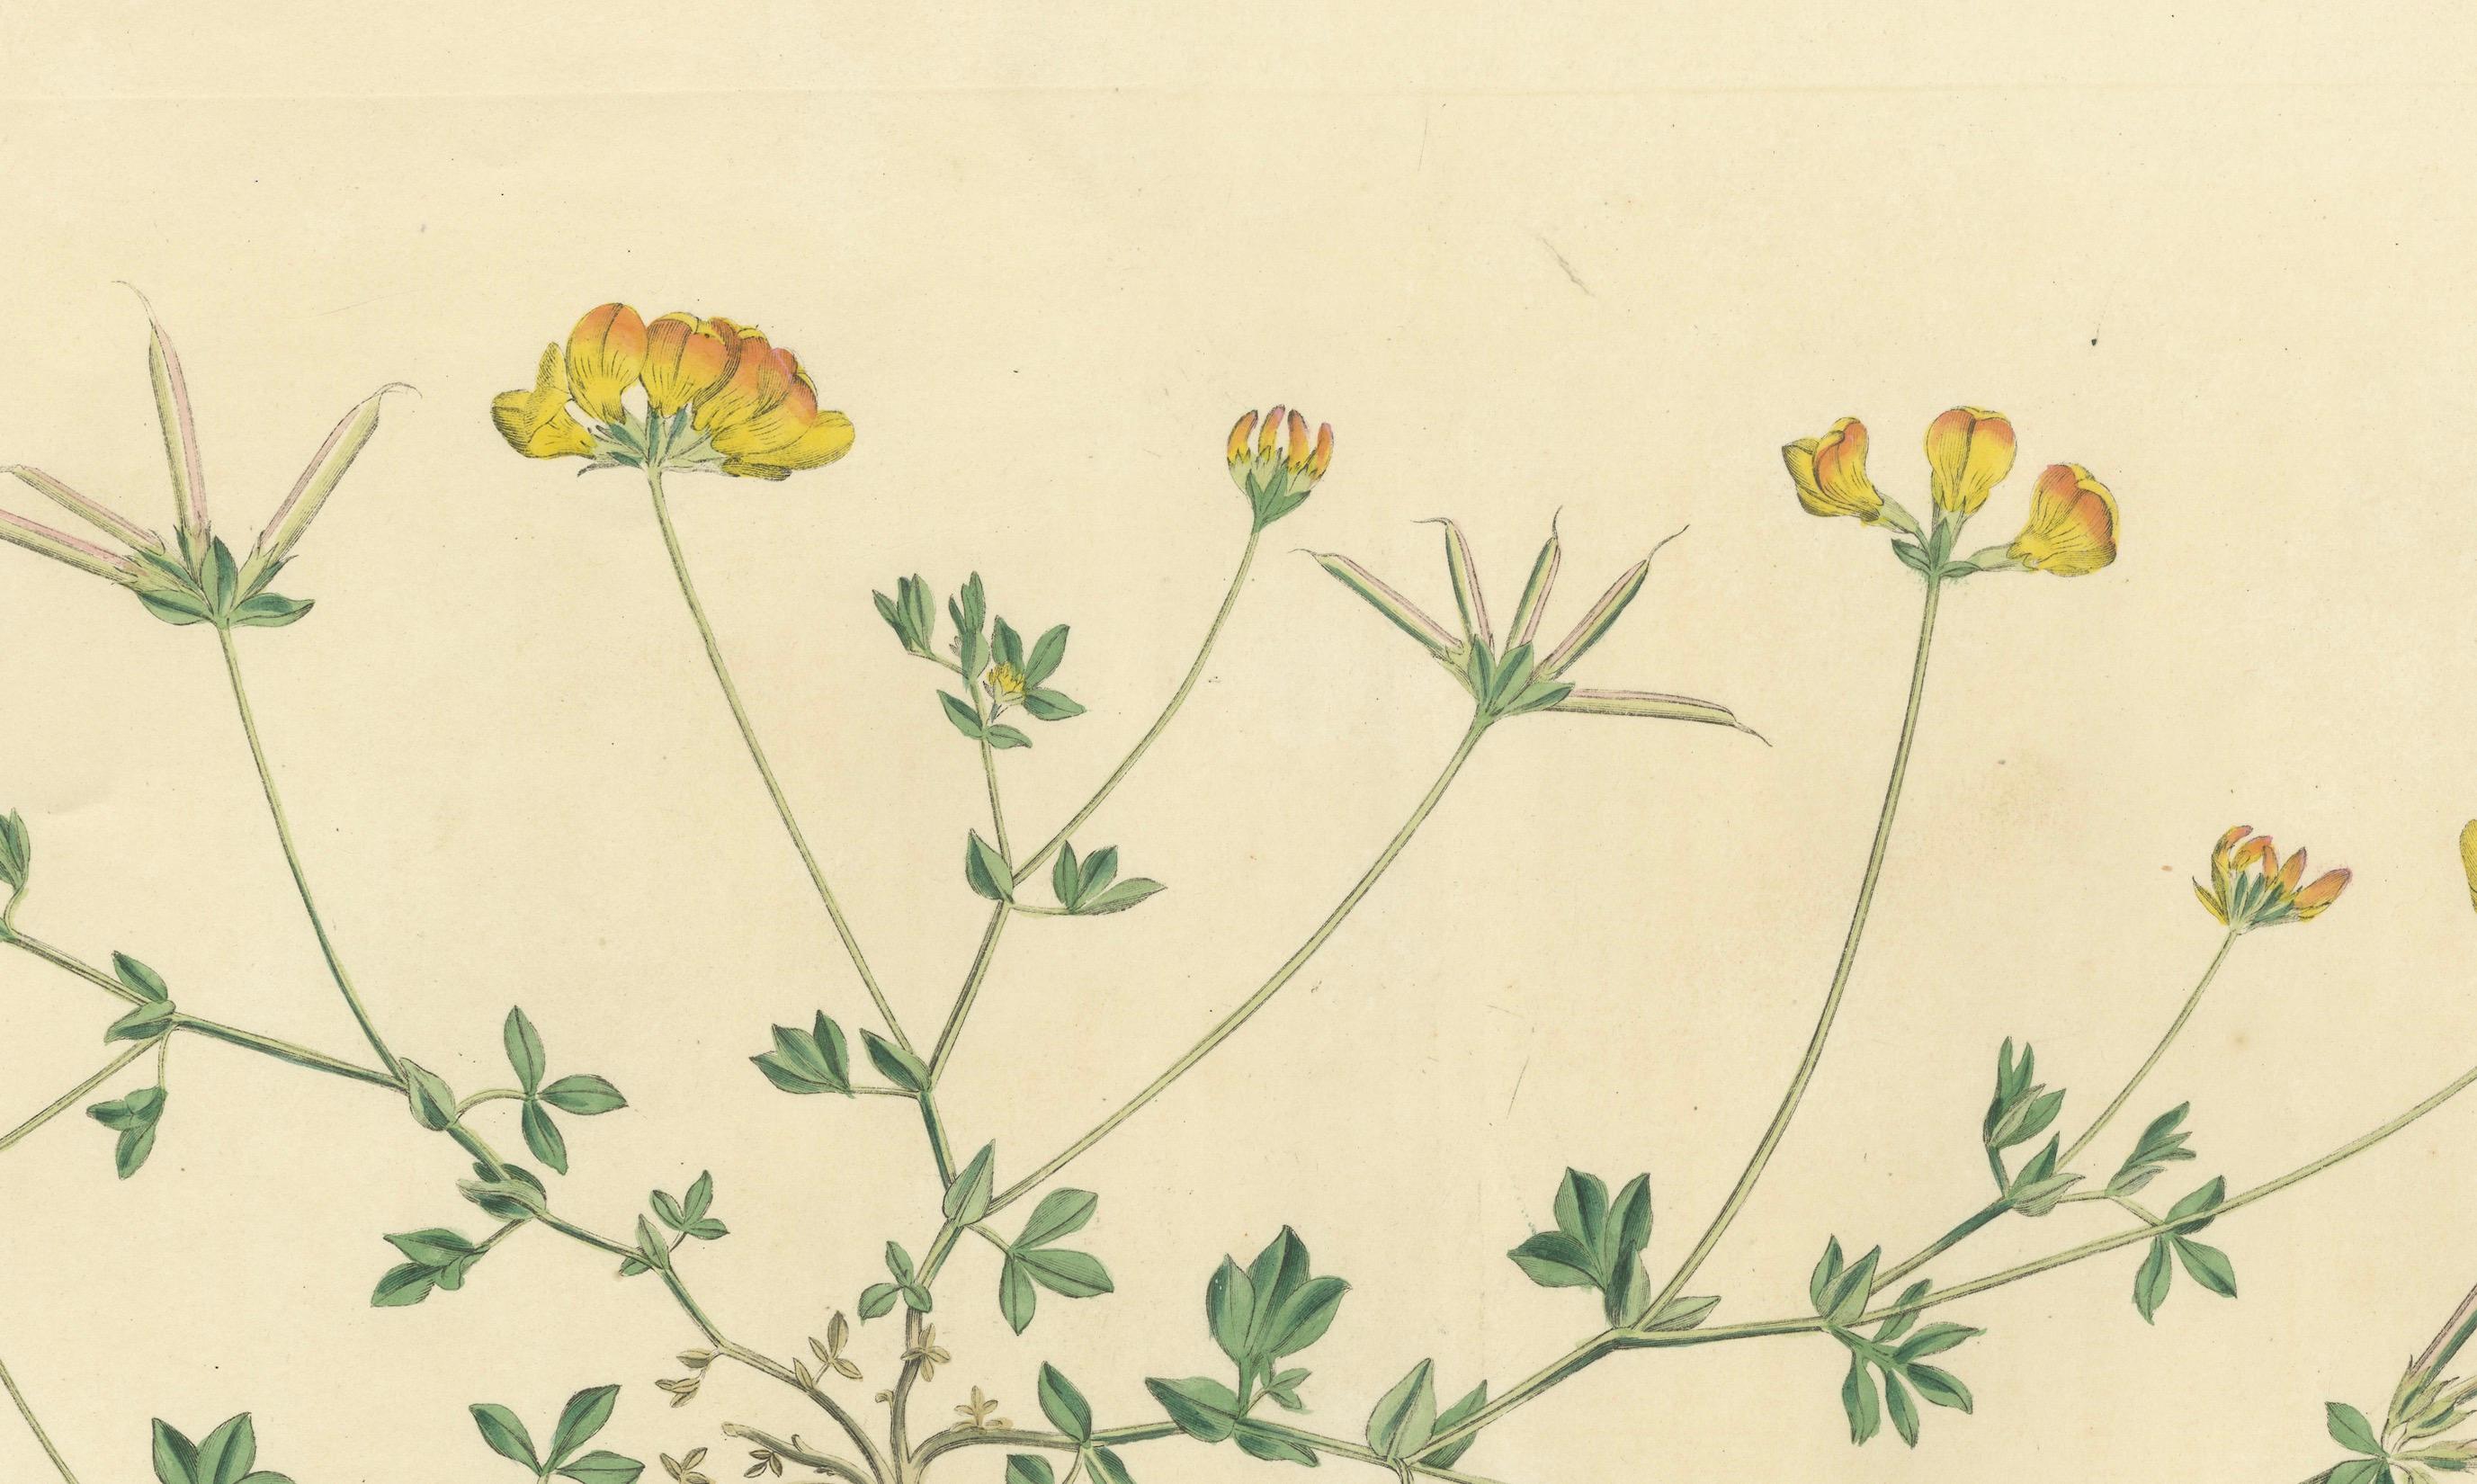 Engraved Hand-Colored Antique Print of the Lotus Corniculatus or Birds-foot Trefoil, 1777